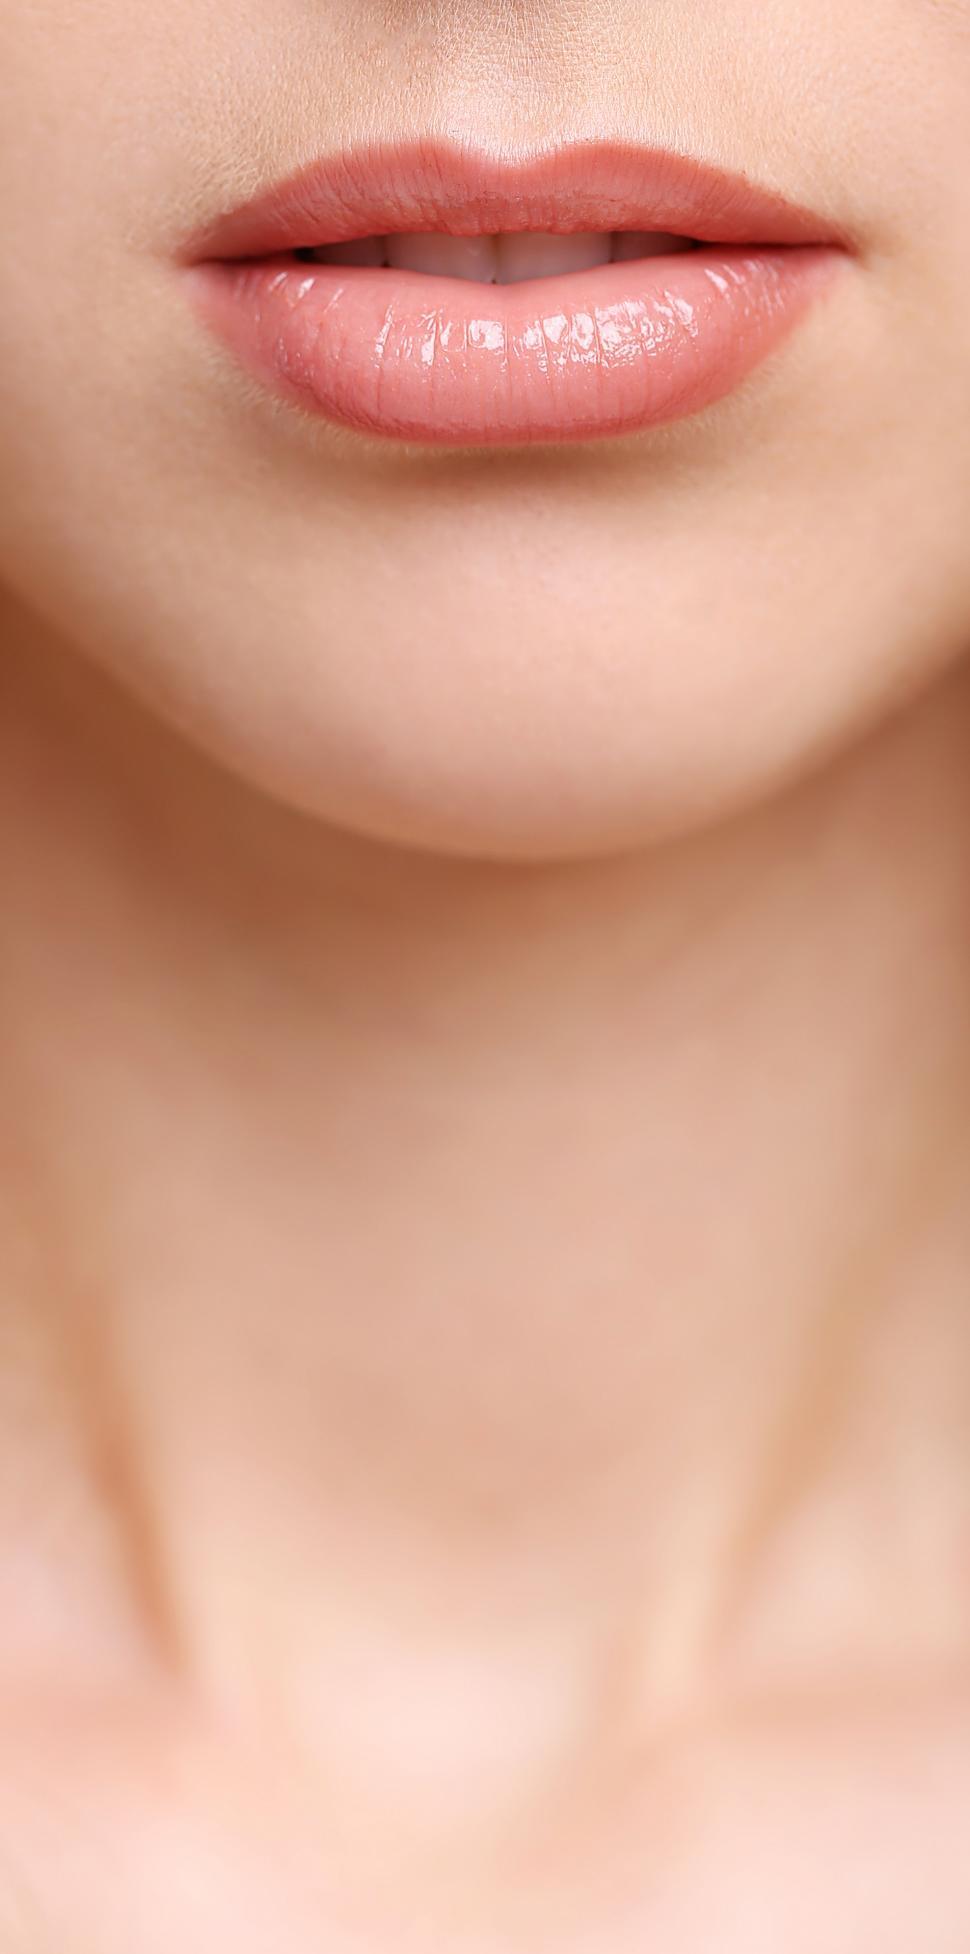 Free Image of Mouth and neck of young woman 